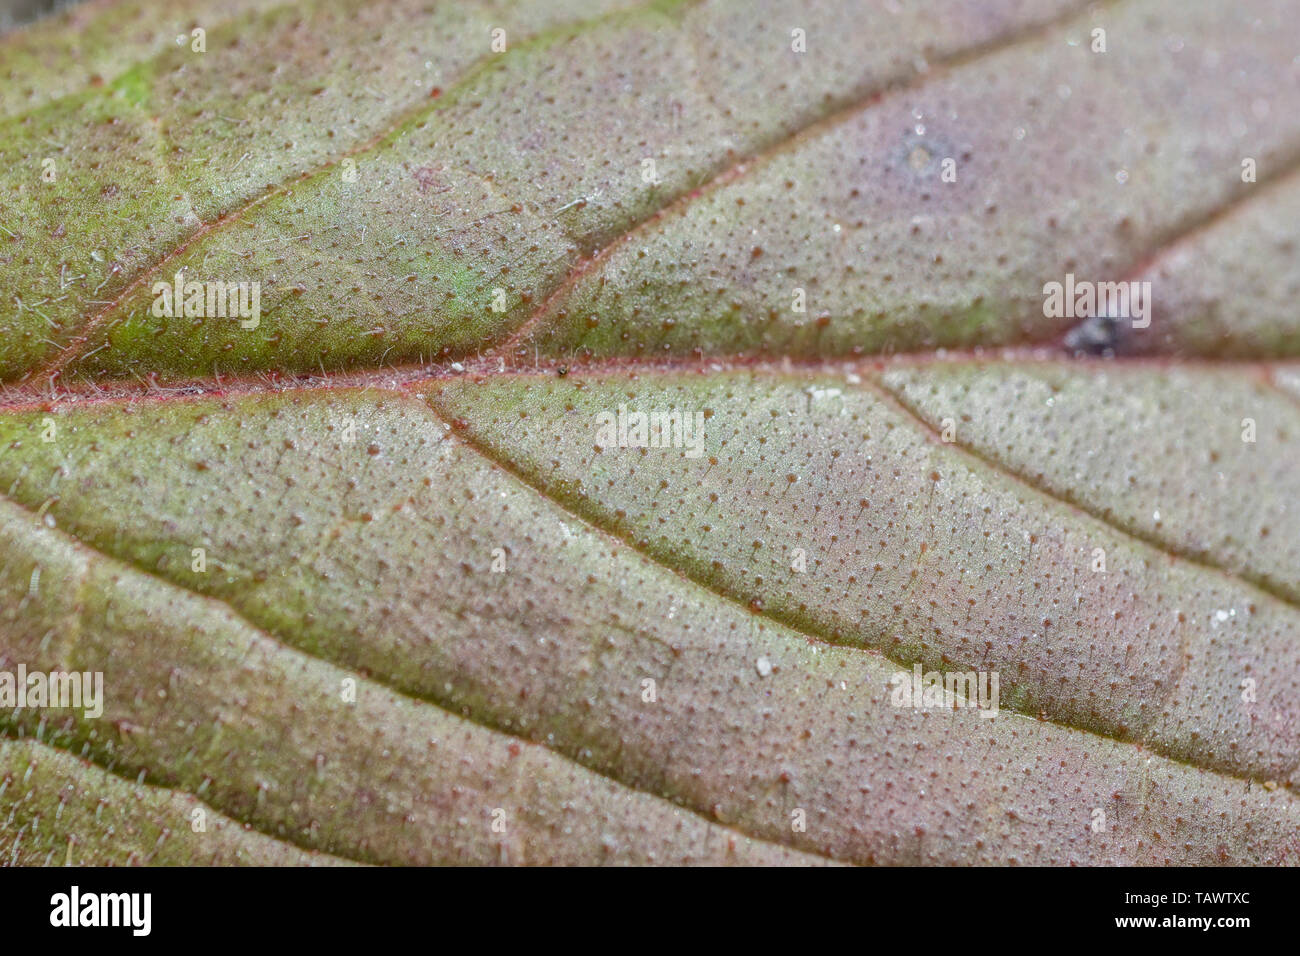 Macro close-up of Echium plant leaf. Uncertain whether it's E. pininana, candicans or fastuosum. Abstract green leaf texture Stock Photo